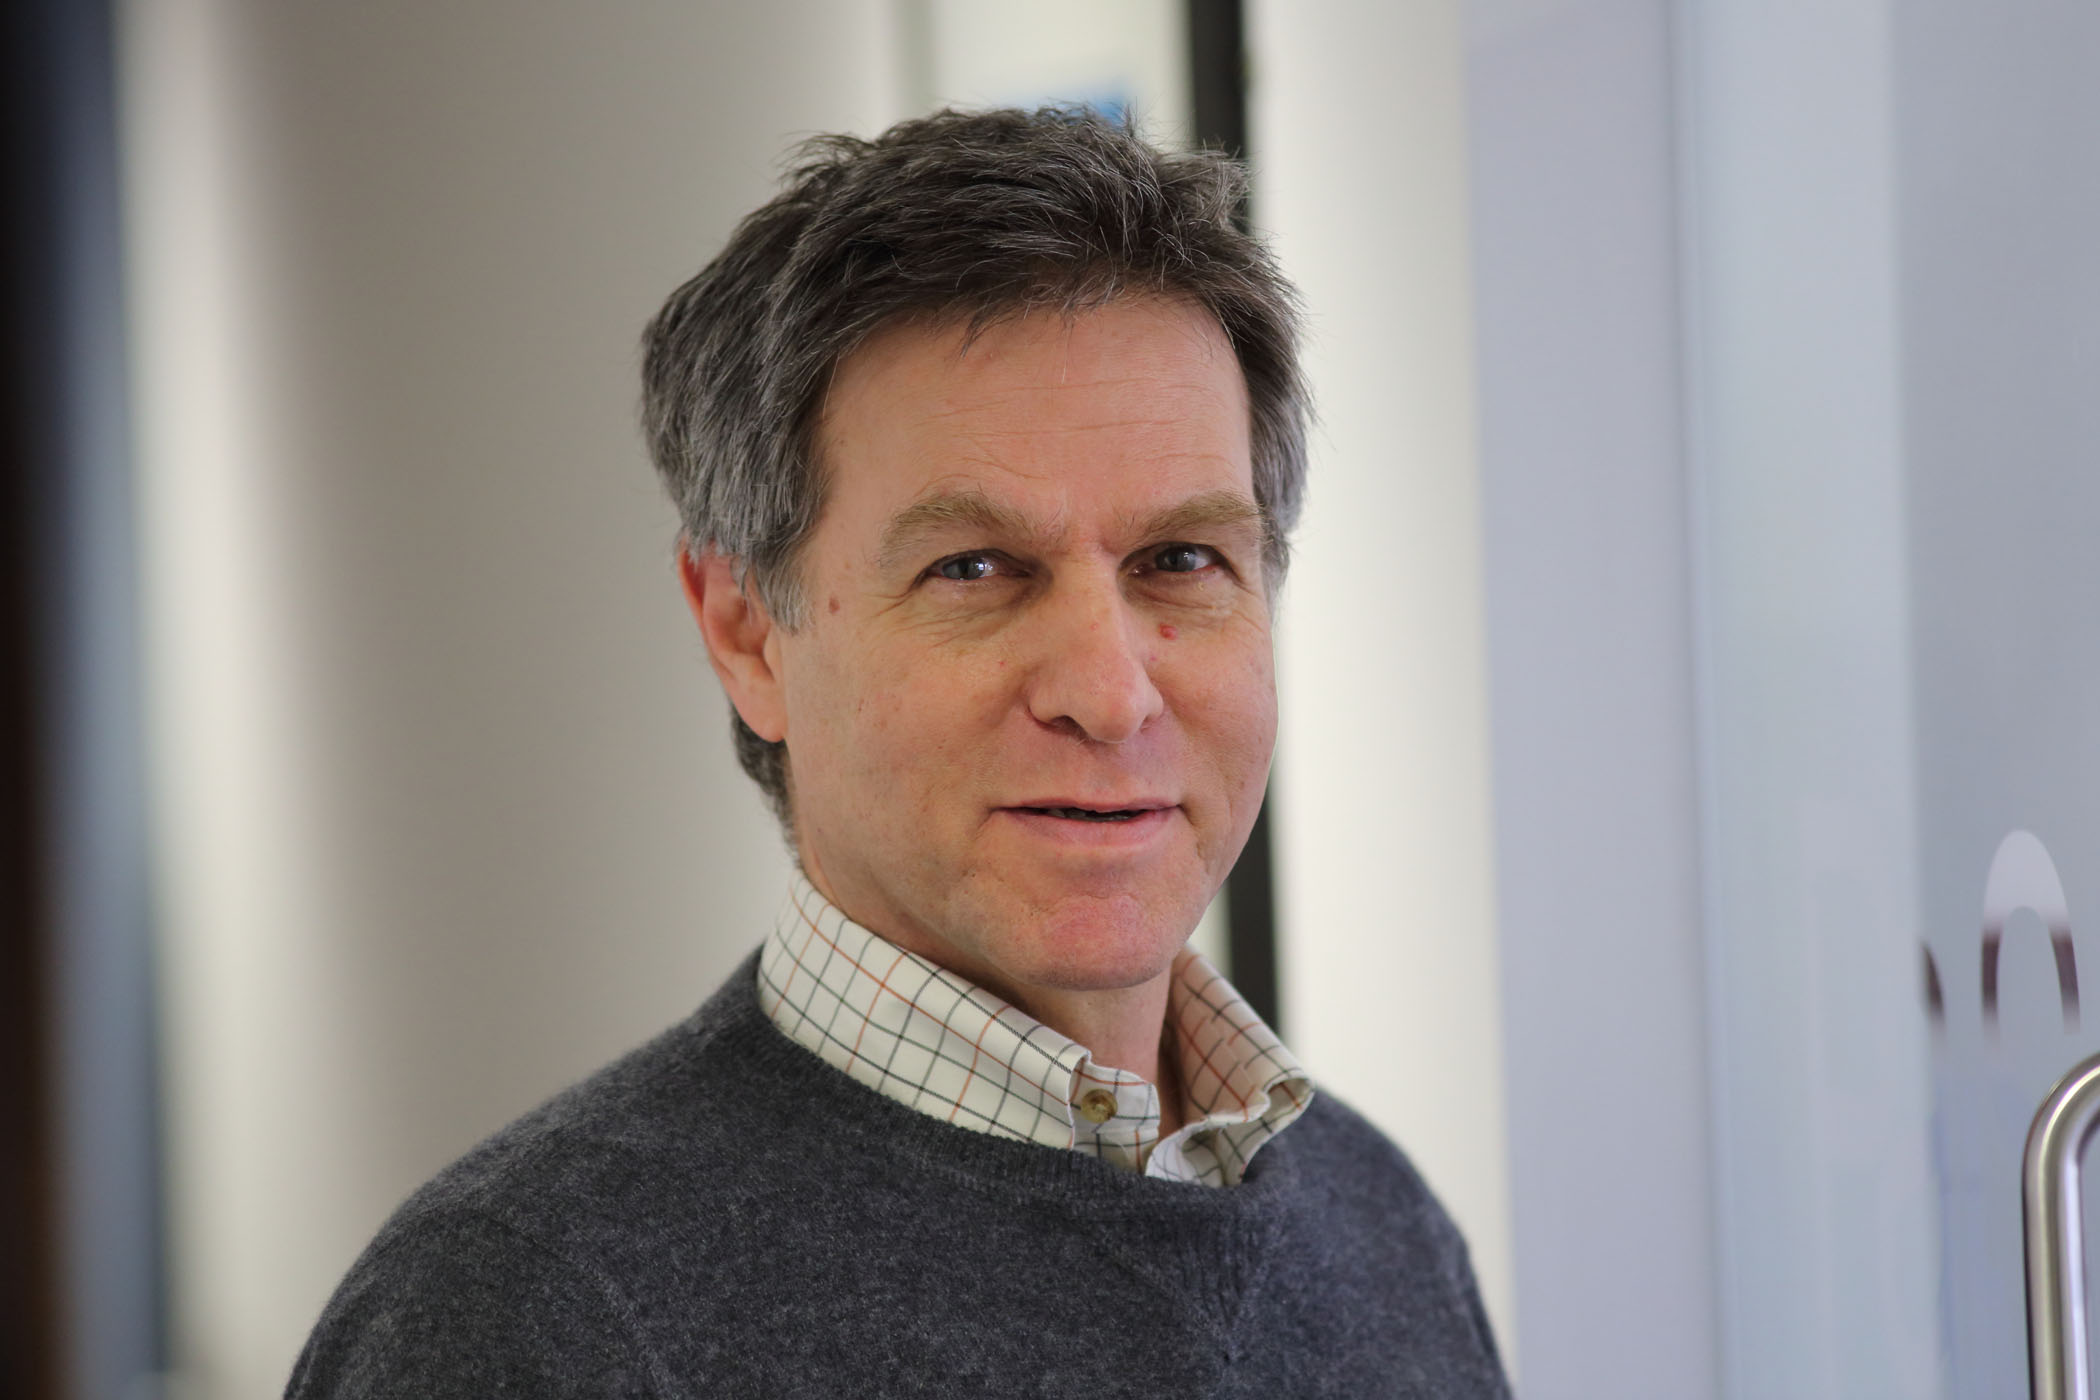 A photograph of Professor Tom Sorell, who has dark hair and is wearing a grey jumper and checked shirt.